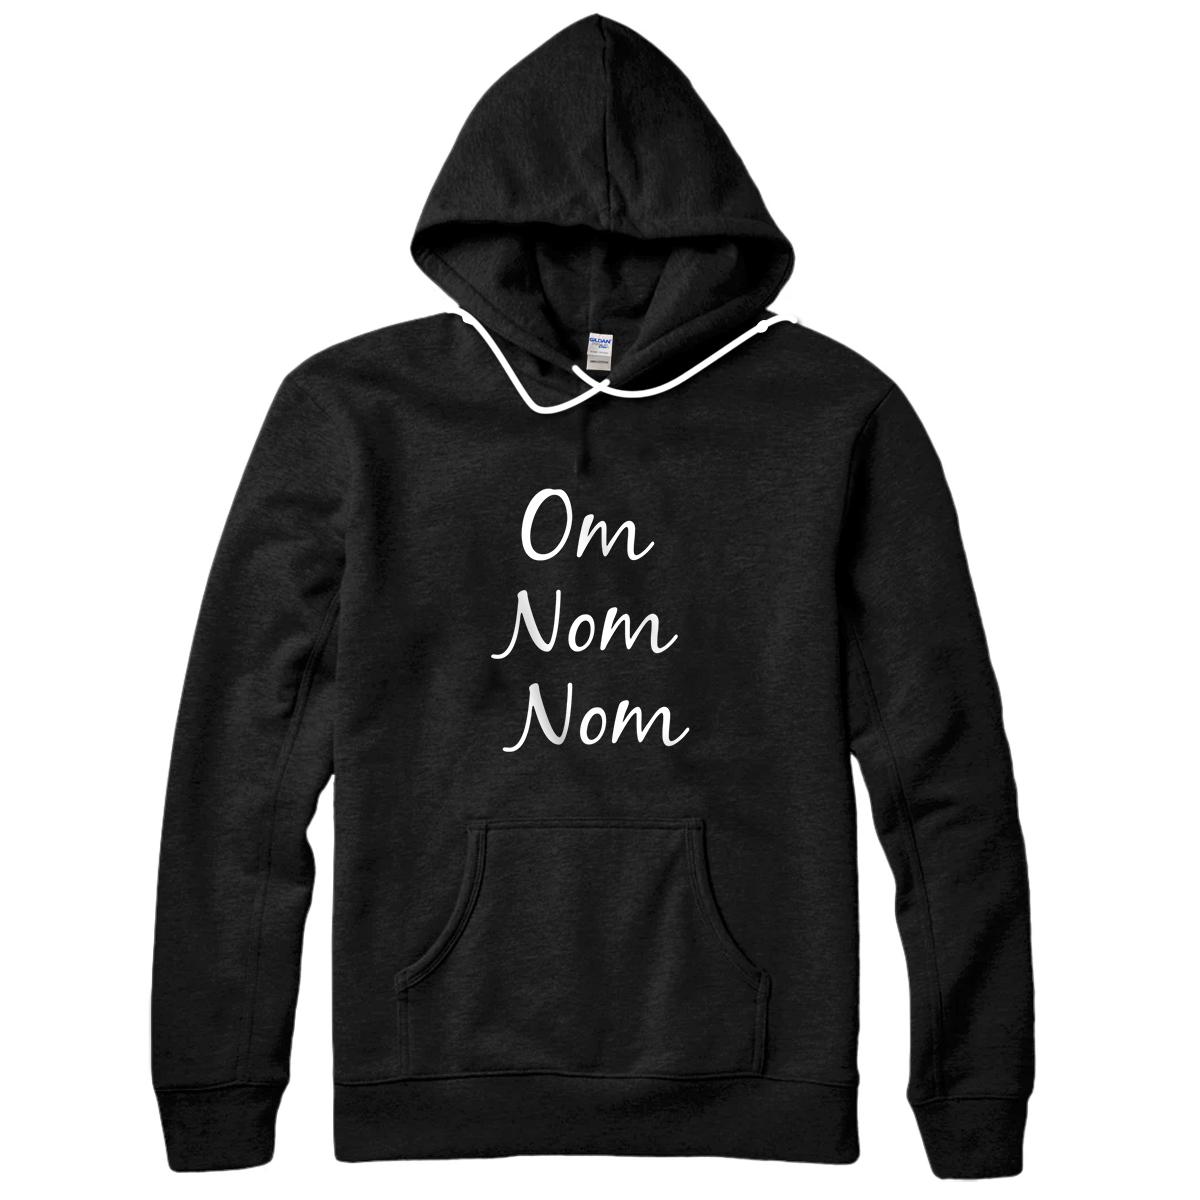 Personalized Yoga designs With Sayings - Om Nom Nom design Pullover Hoodie